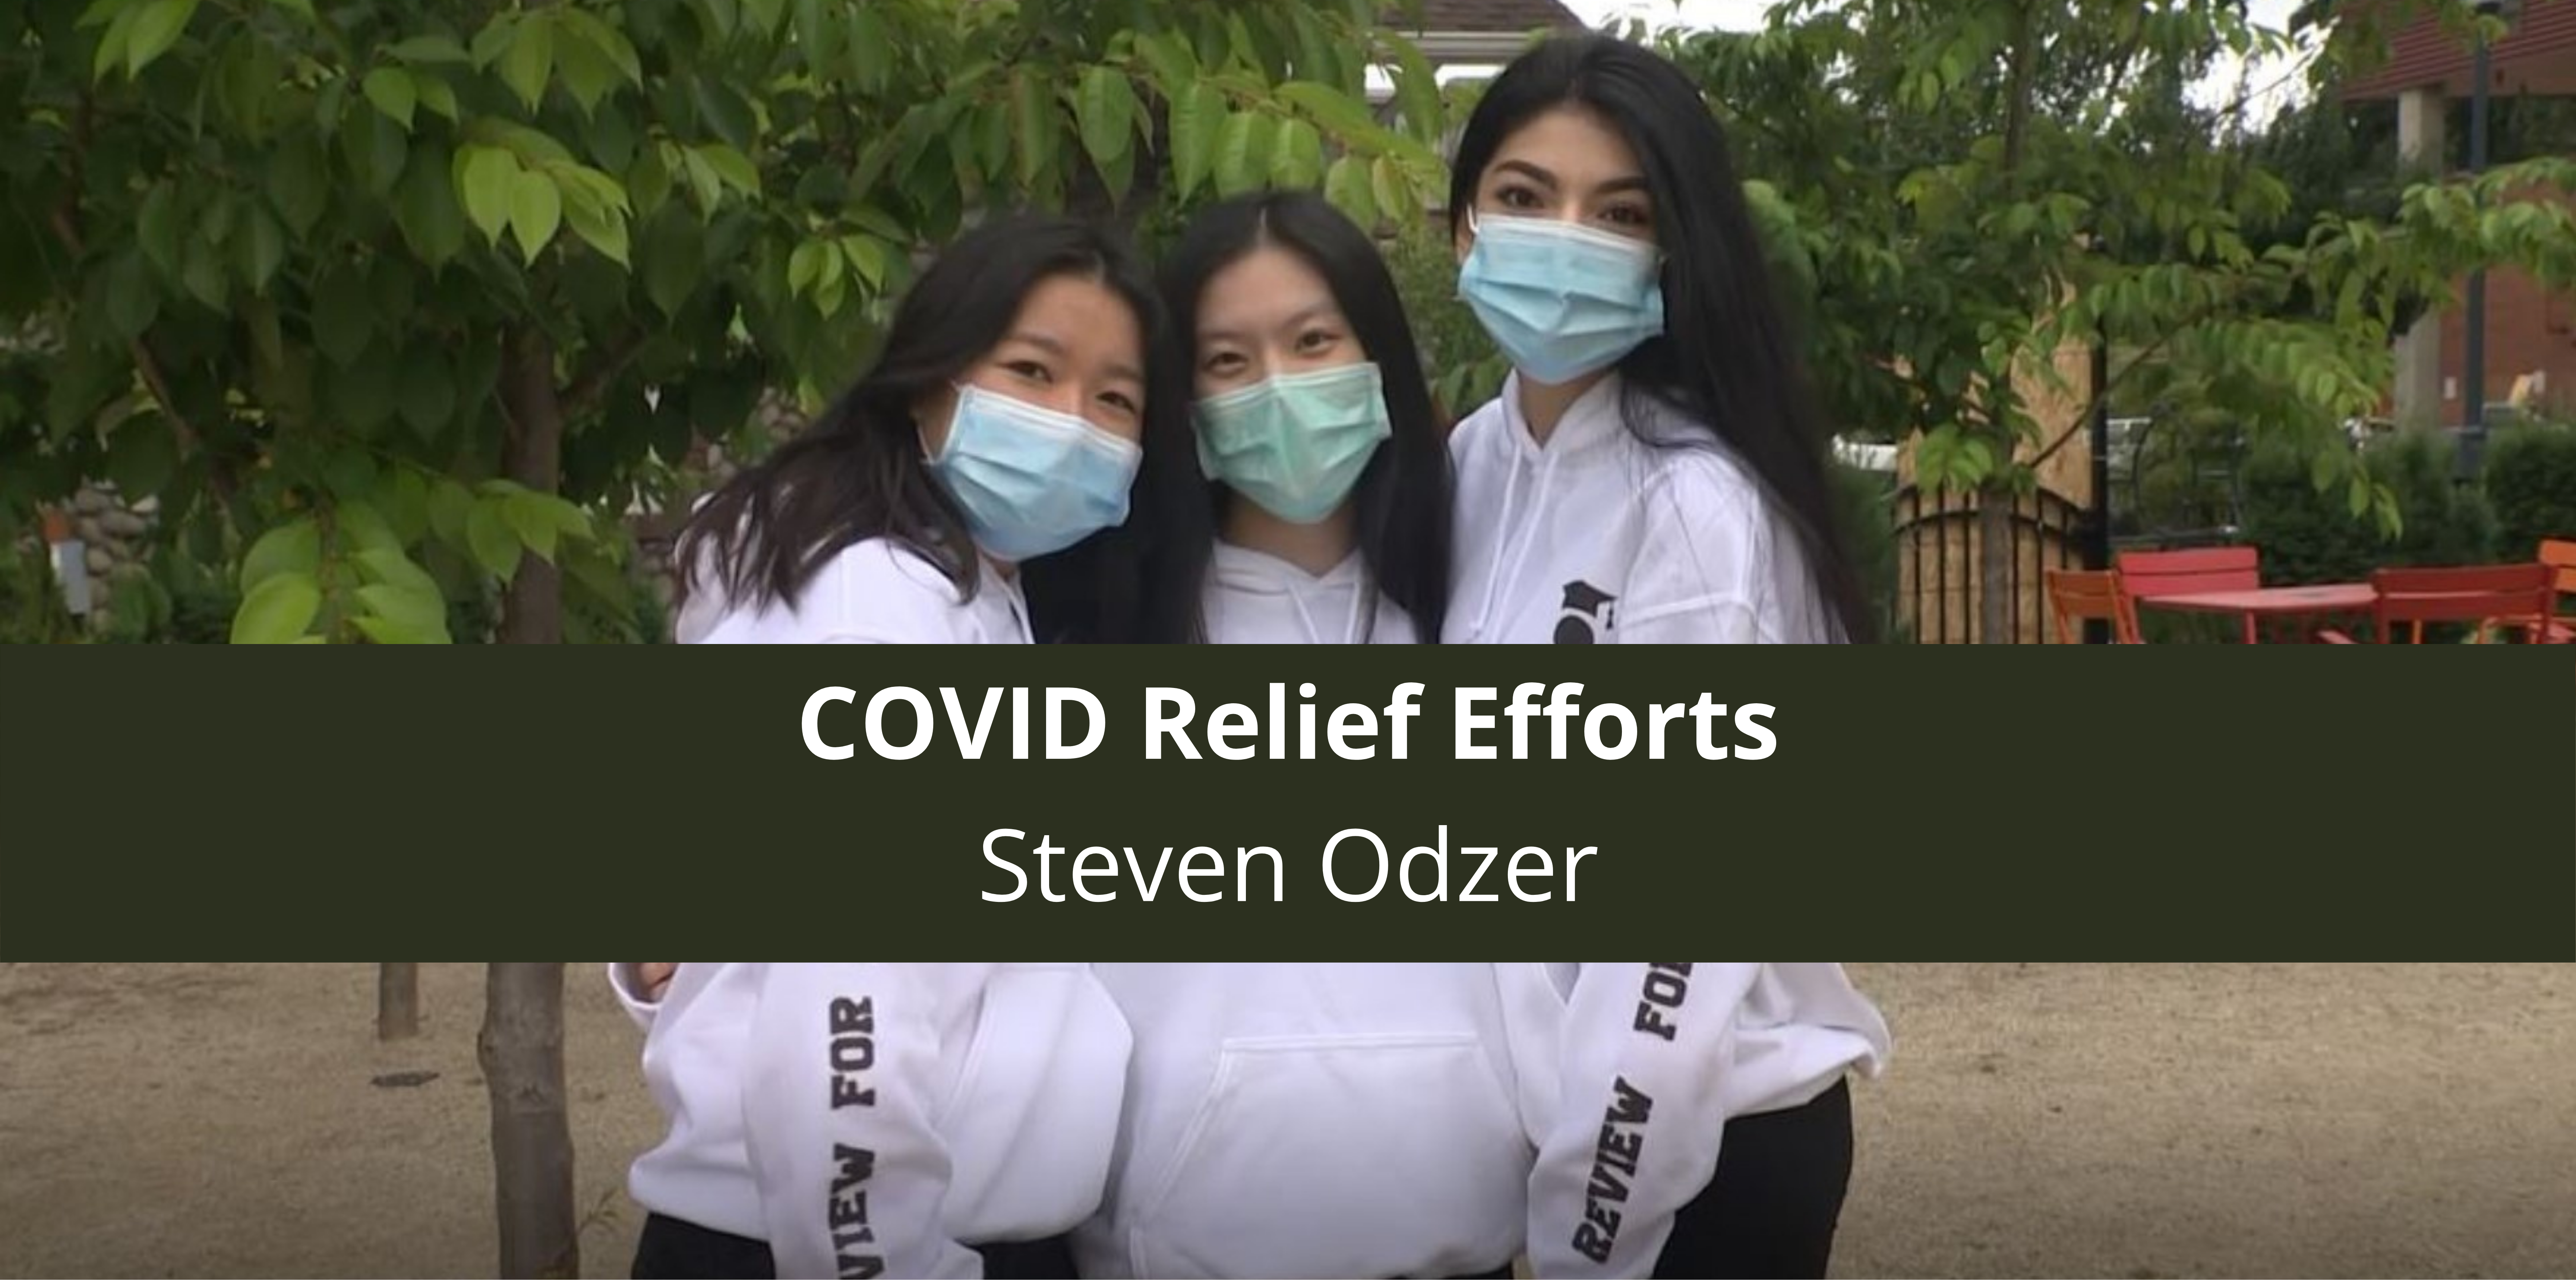 Steven Odzer Partners with Rabbi for COVID Relief Efforts